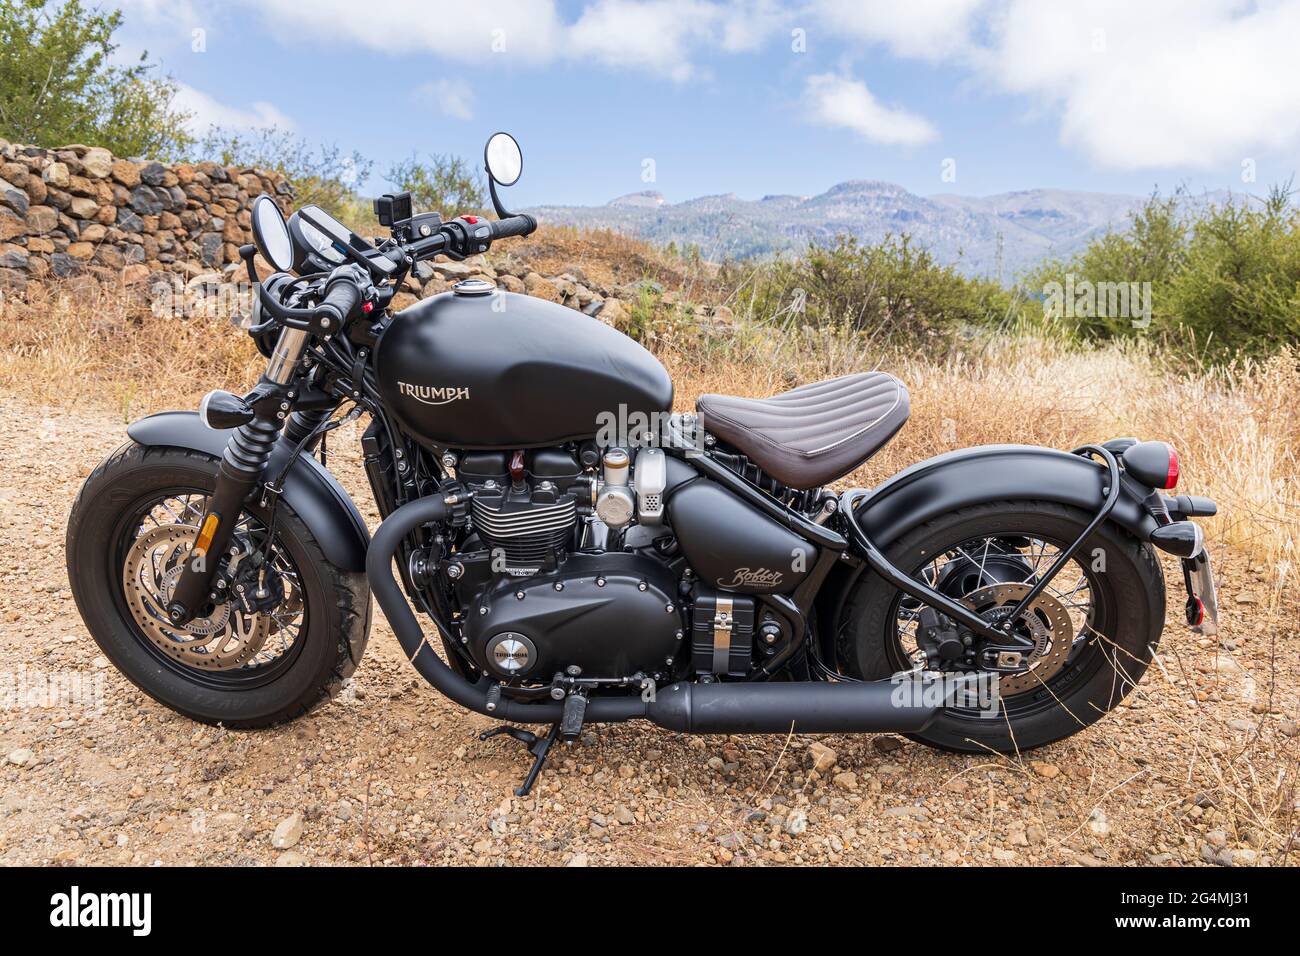 Retro style bike. Triumph Bobber, parked on rough ground in Tenerife, Canary Islands, Spain Stock Photo